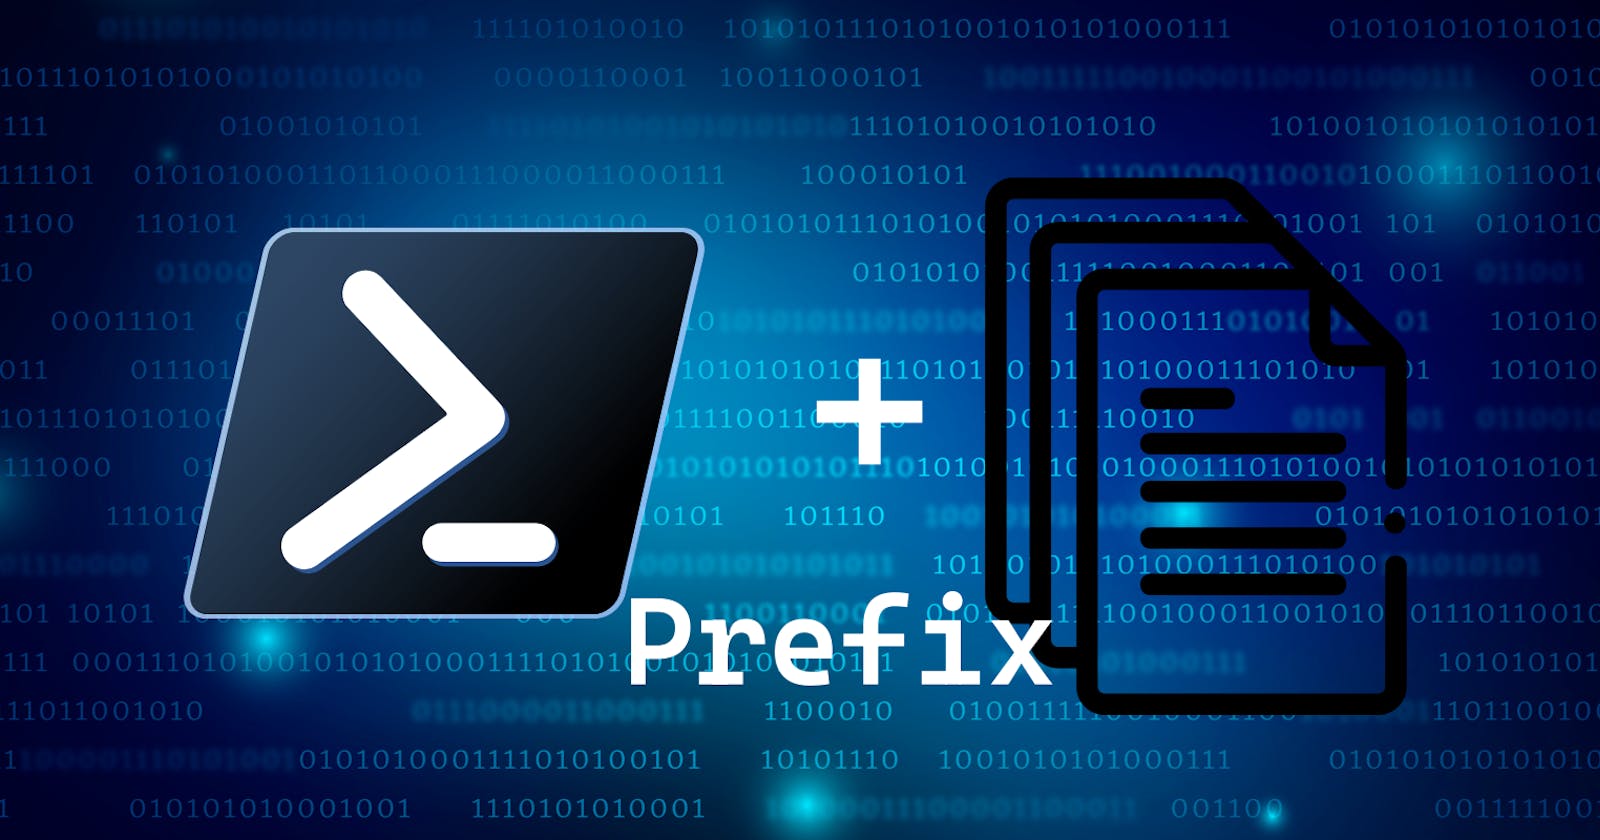 Boost your productivity with PowerShell: Adding Prefixes to Multiple Files